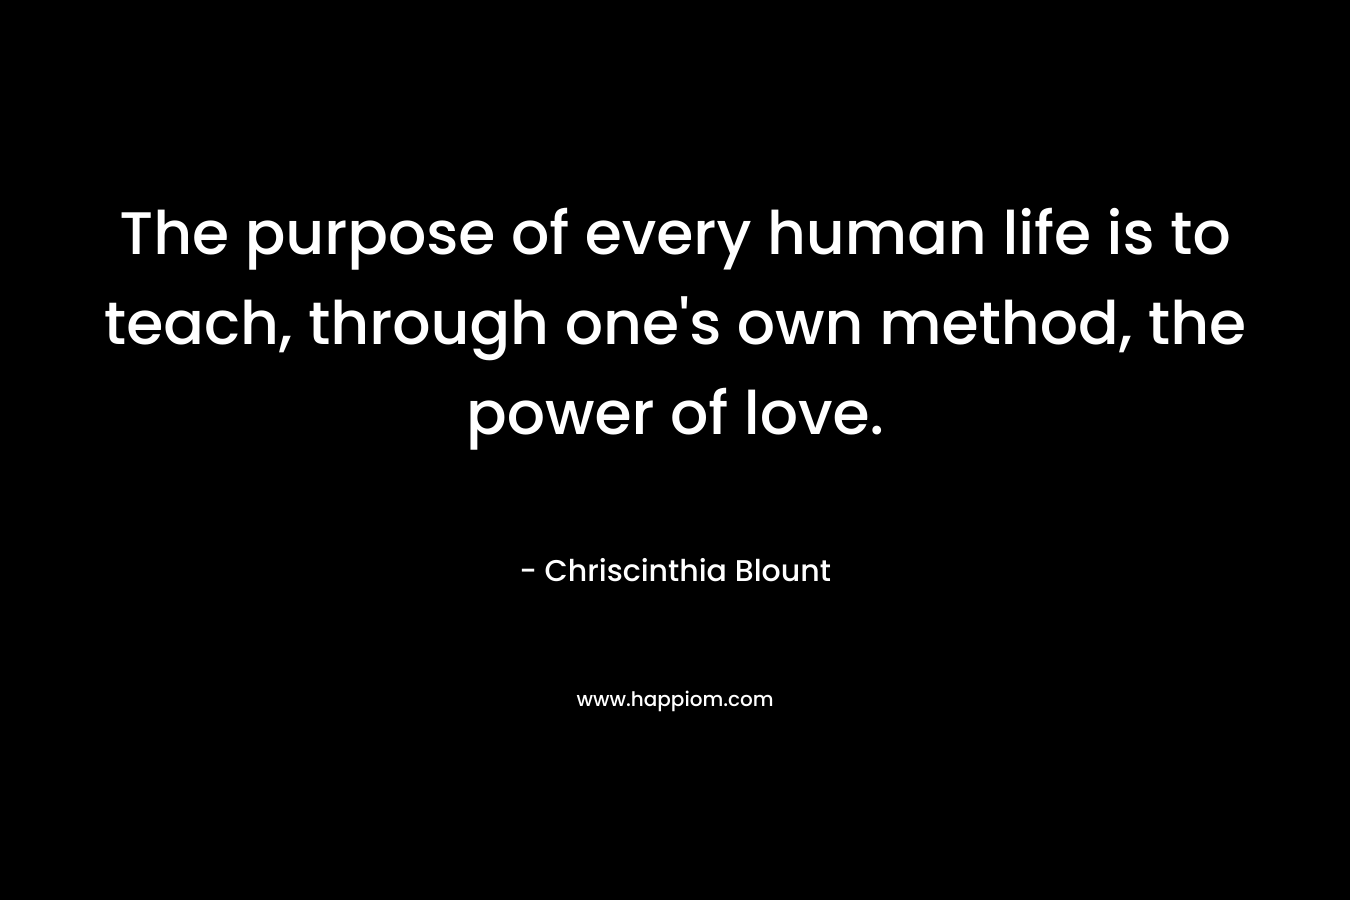 The purpose of every human life is to teach, through one's own method, the power of love.